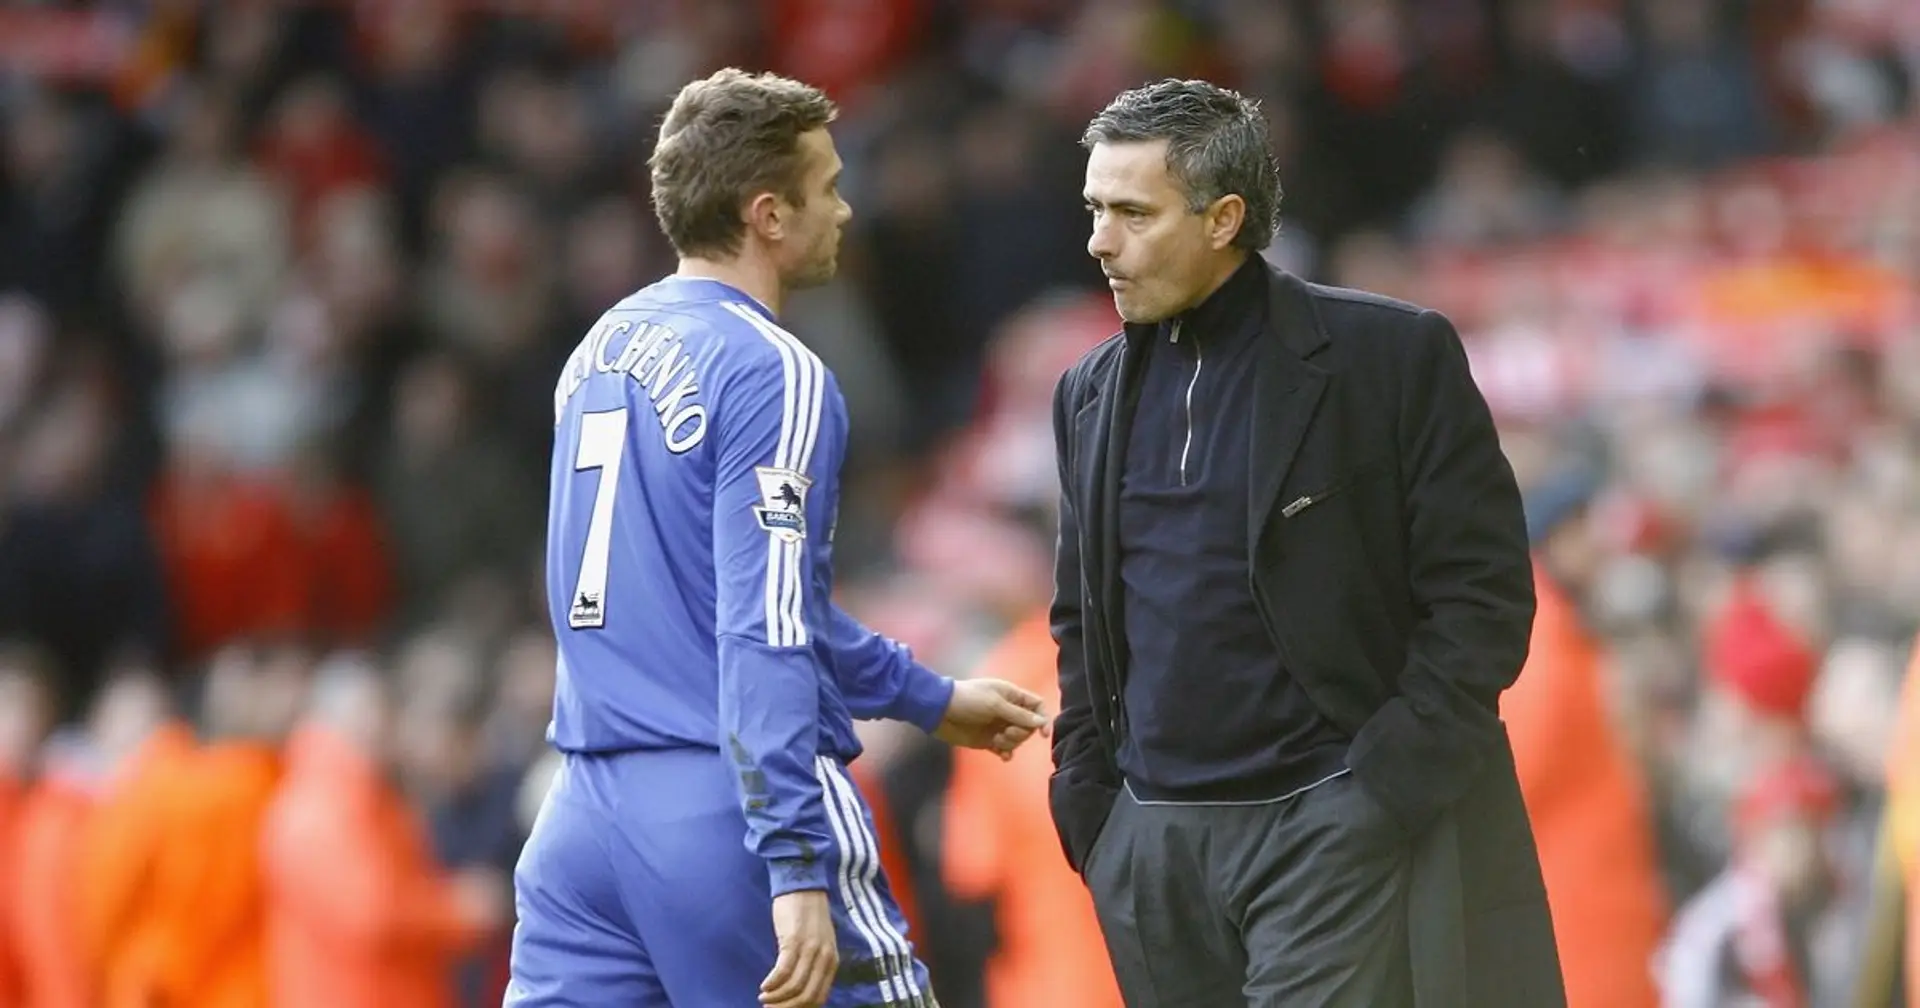 He was a prince in Milan and at Chelsea we had no princes': Mourinho's old quote on Shevchenko still rings a bell in 2021